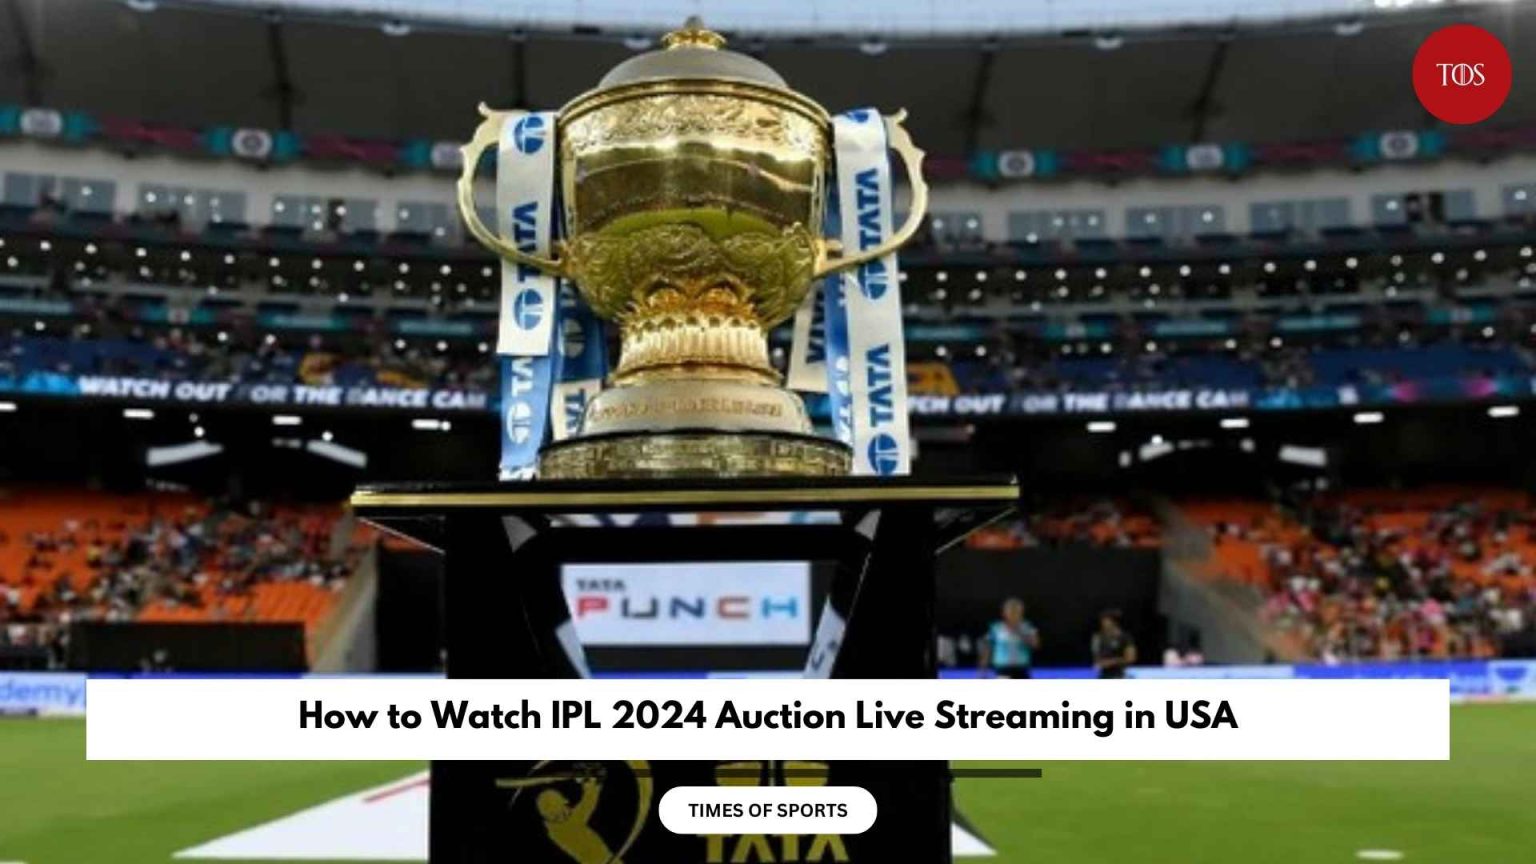 How to Watch IPL 2024 Auction Live Streaming in USA